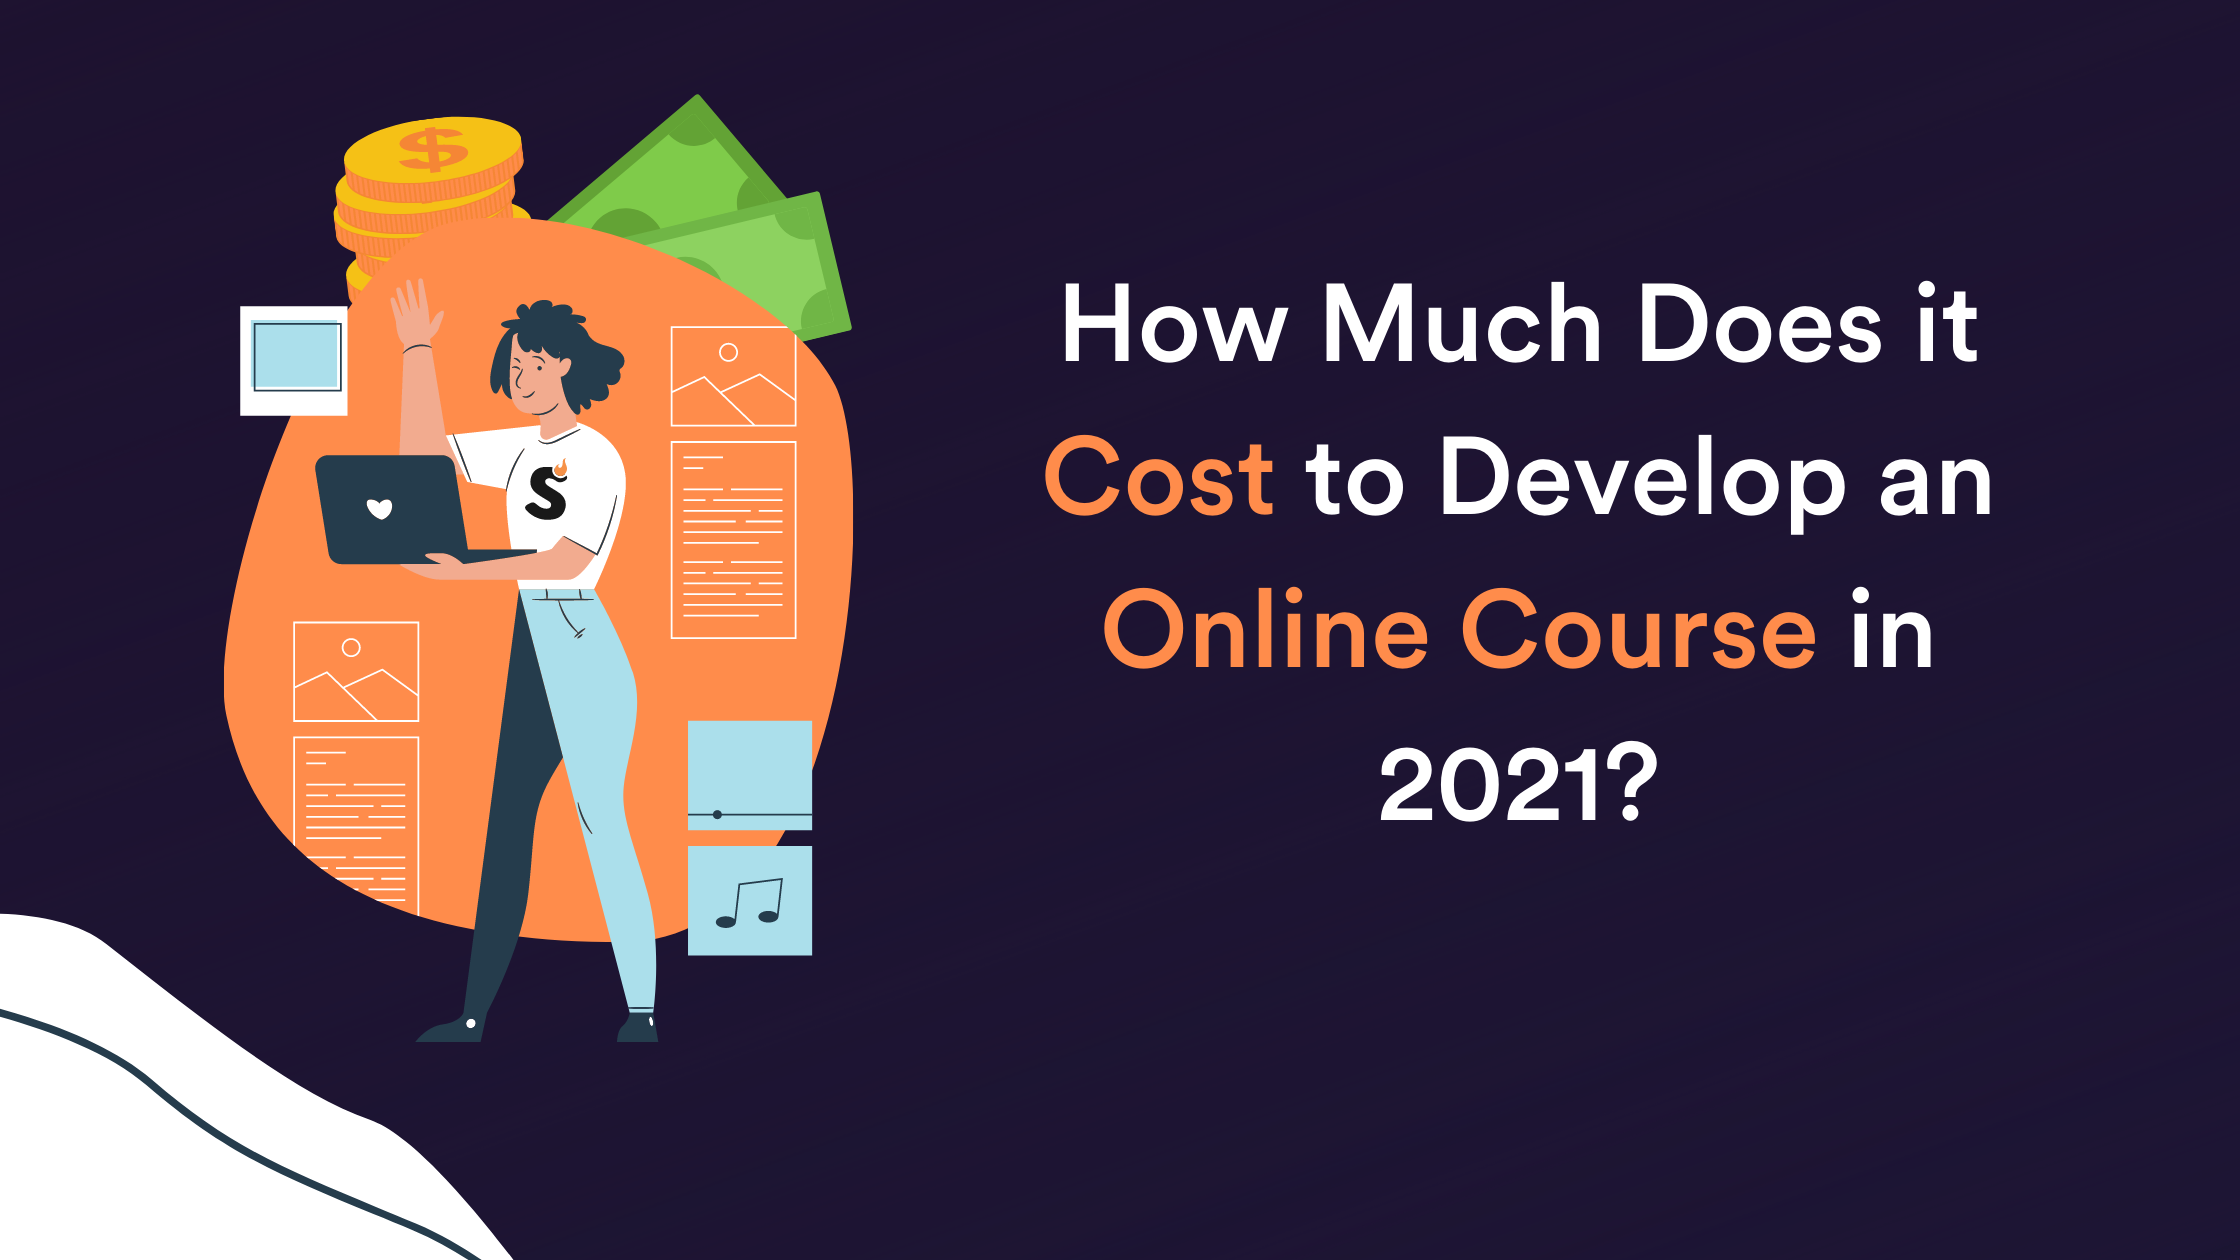 How Much Does it Cost to Develop an Online Course in 2021?